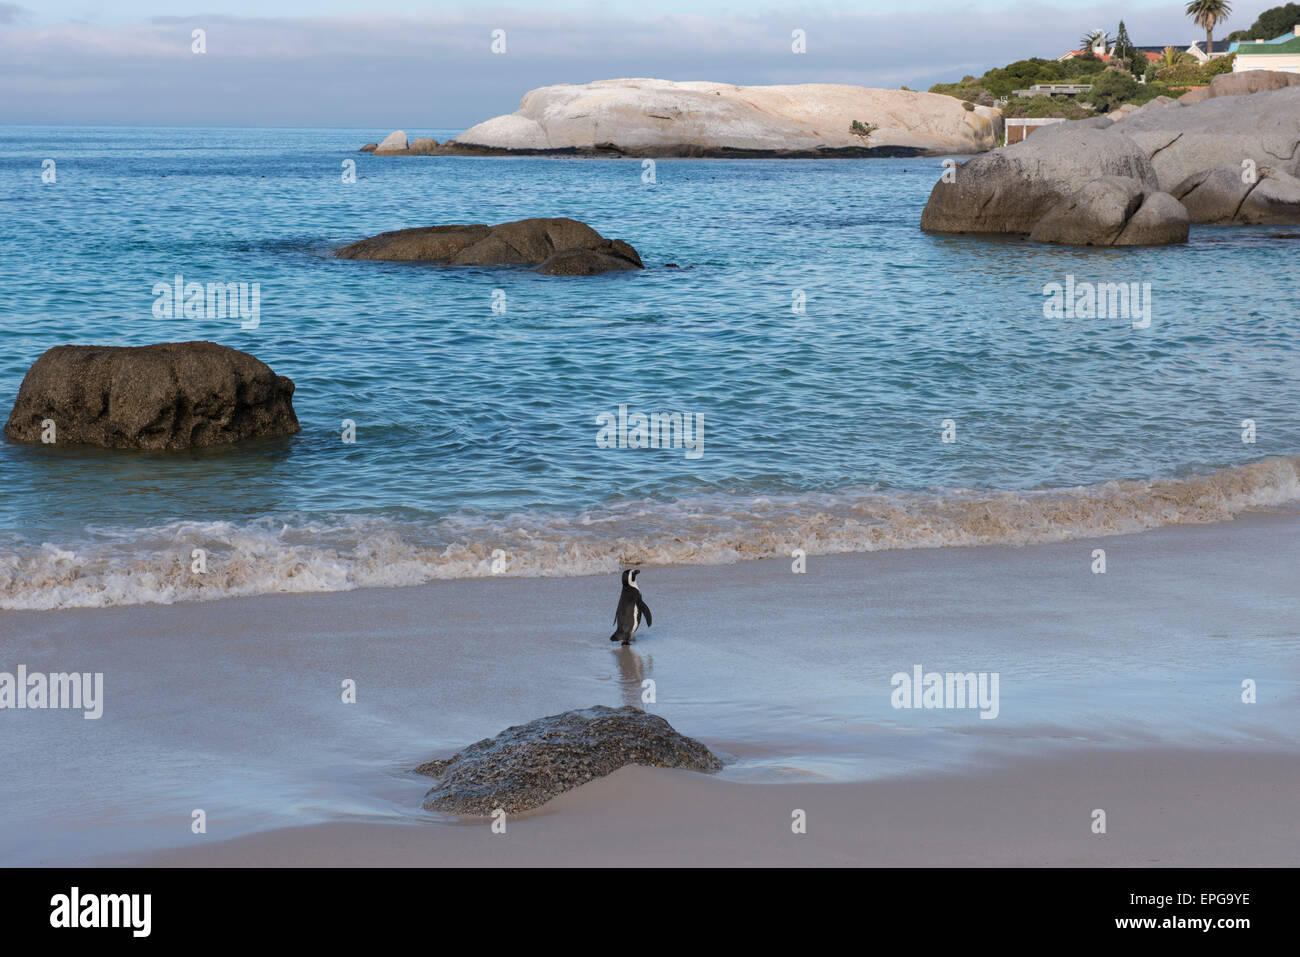 South Africa, Cape Town, Simon's Town, Table Mountain National Park, Boulders Beach. Colony of endangered African Penguins. Stock Photo